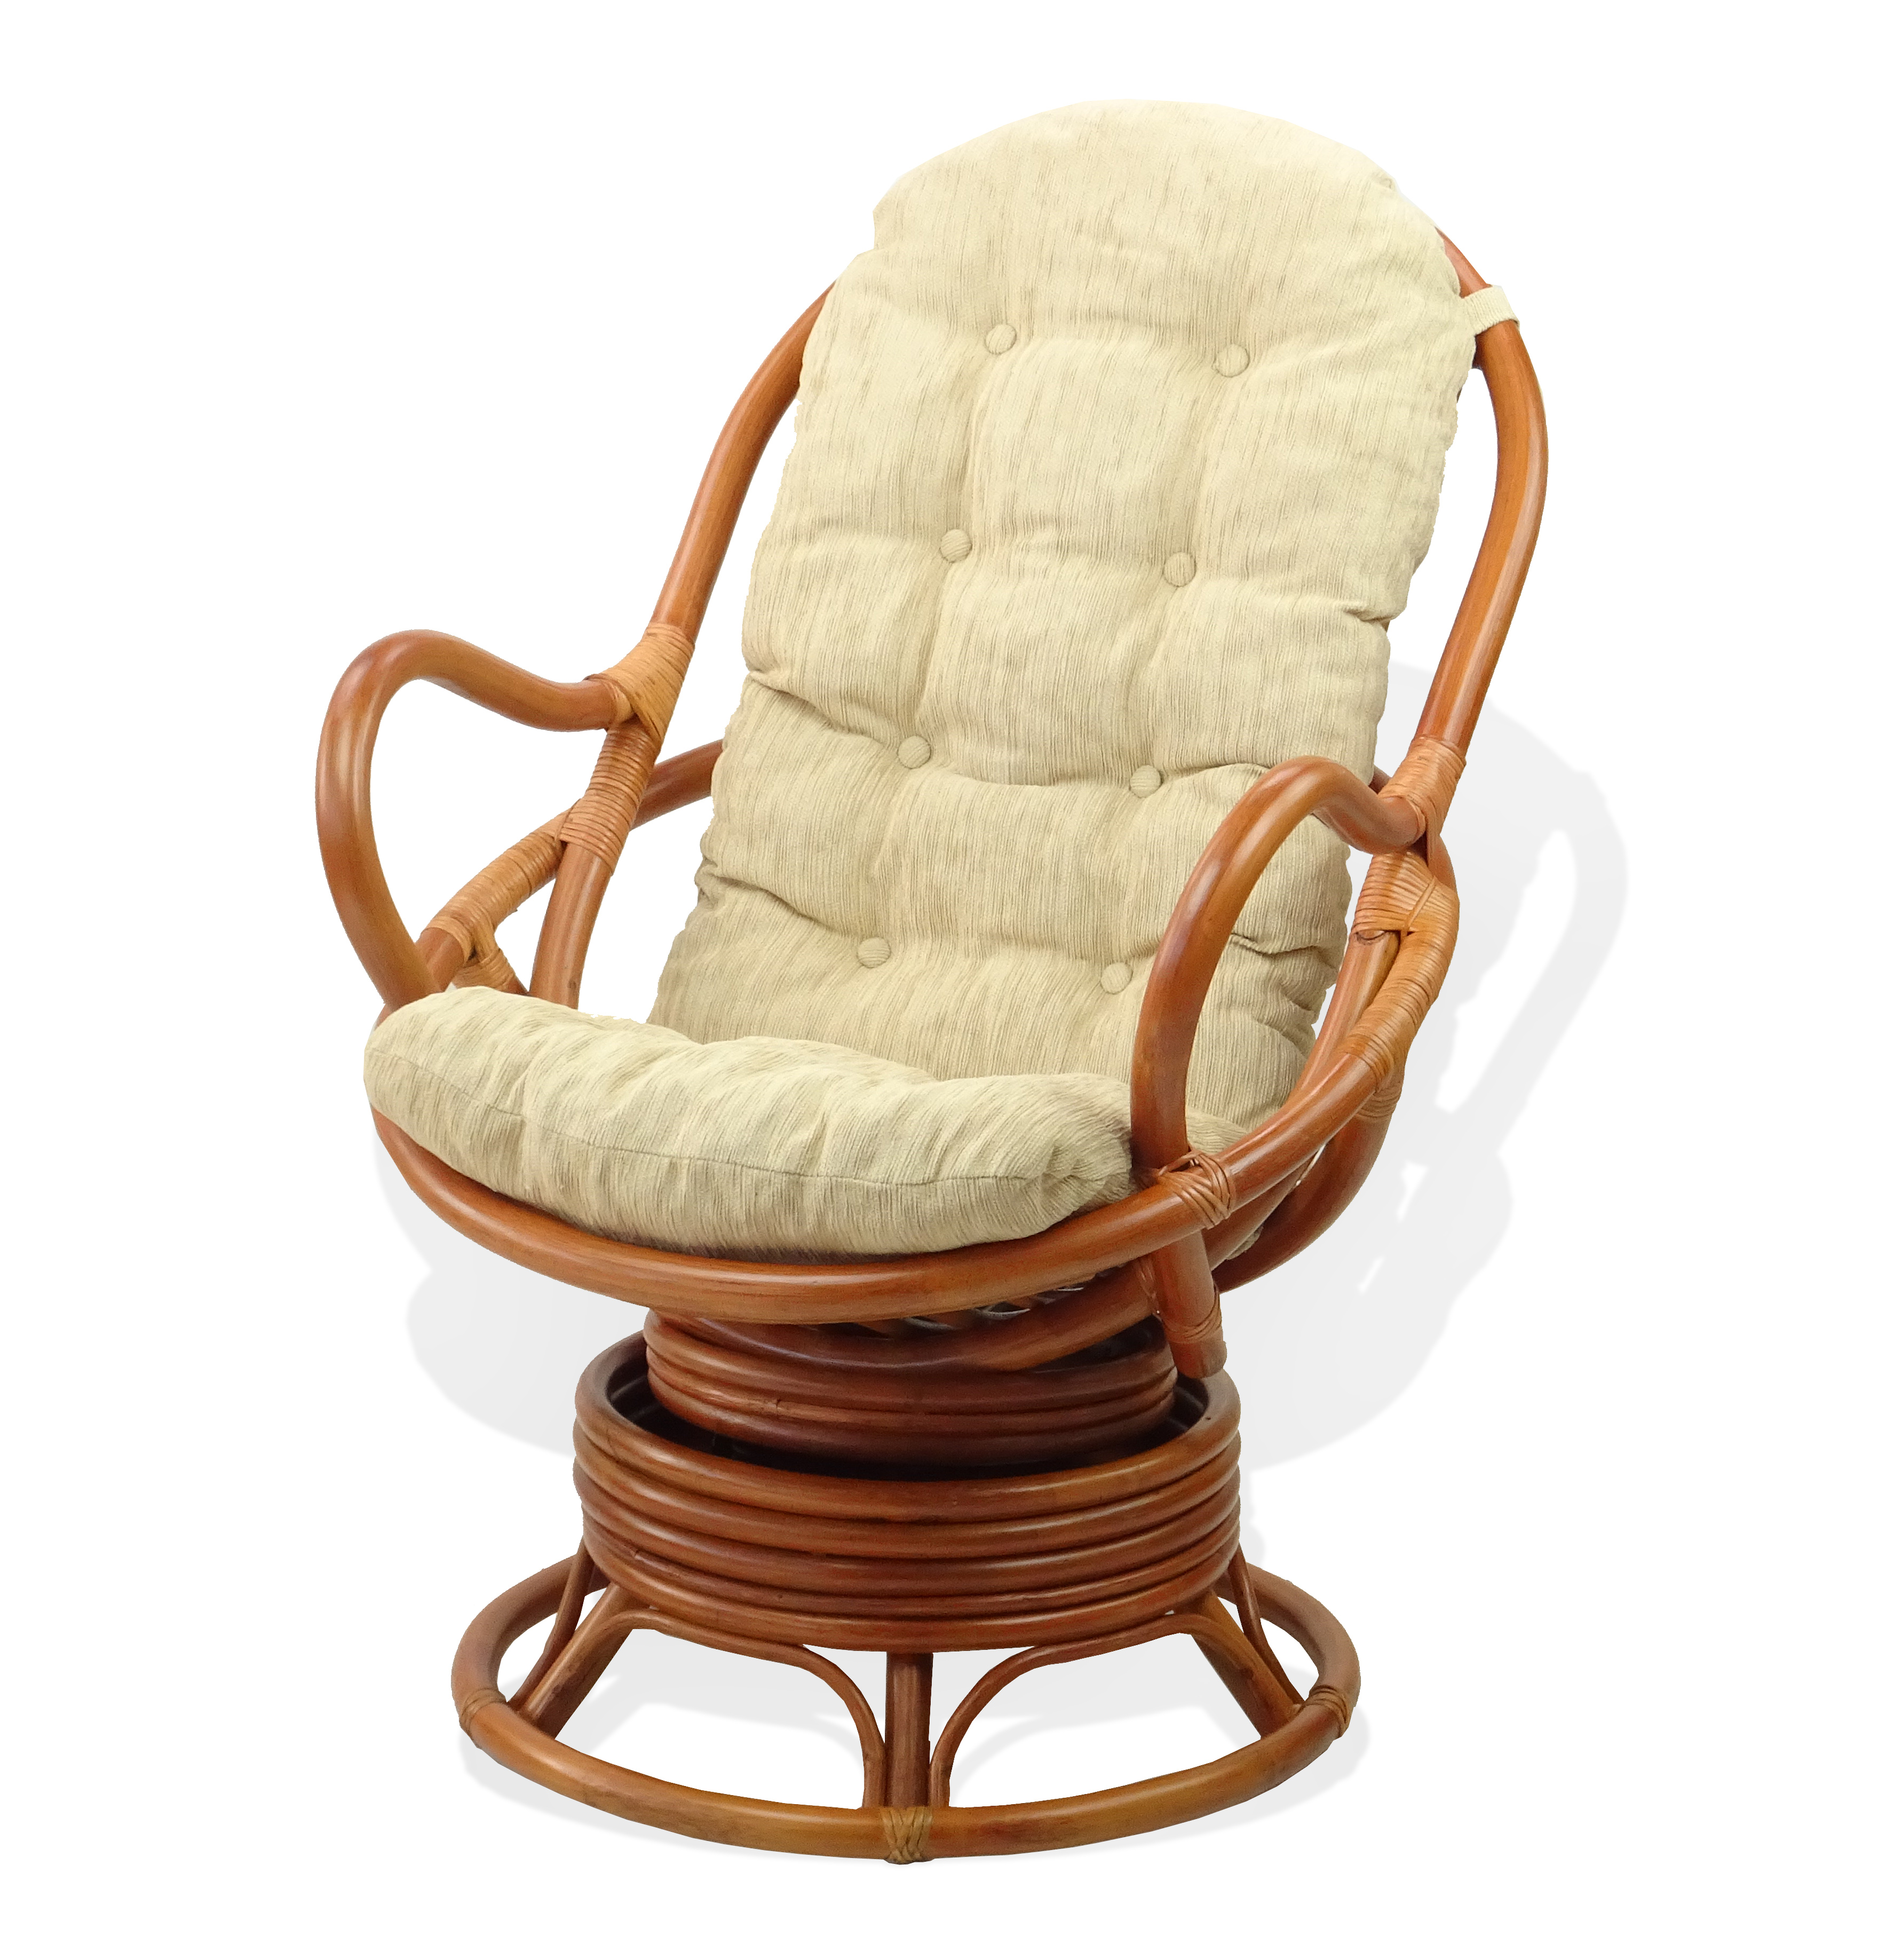 SK New Interiors Set of 2 Java Swivel Rocking Lounge Chair Natural Rattan Wicker with Cream Cushion and Round Coffee Table, Colonial - image 4 of 5